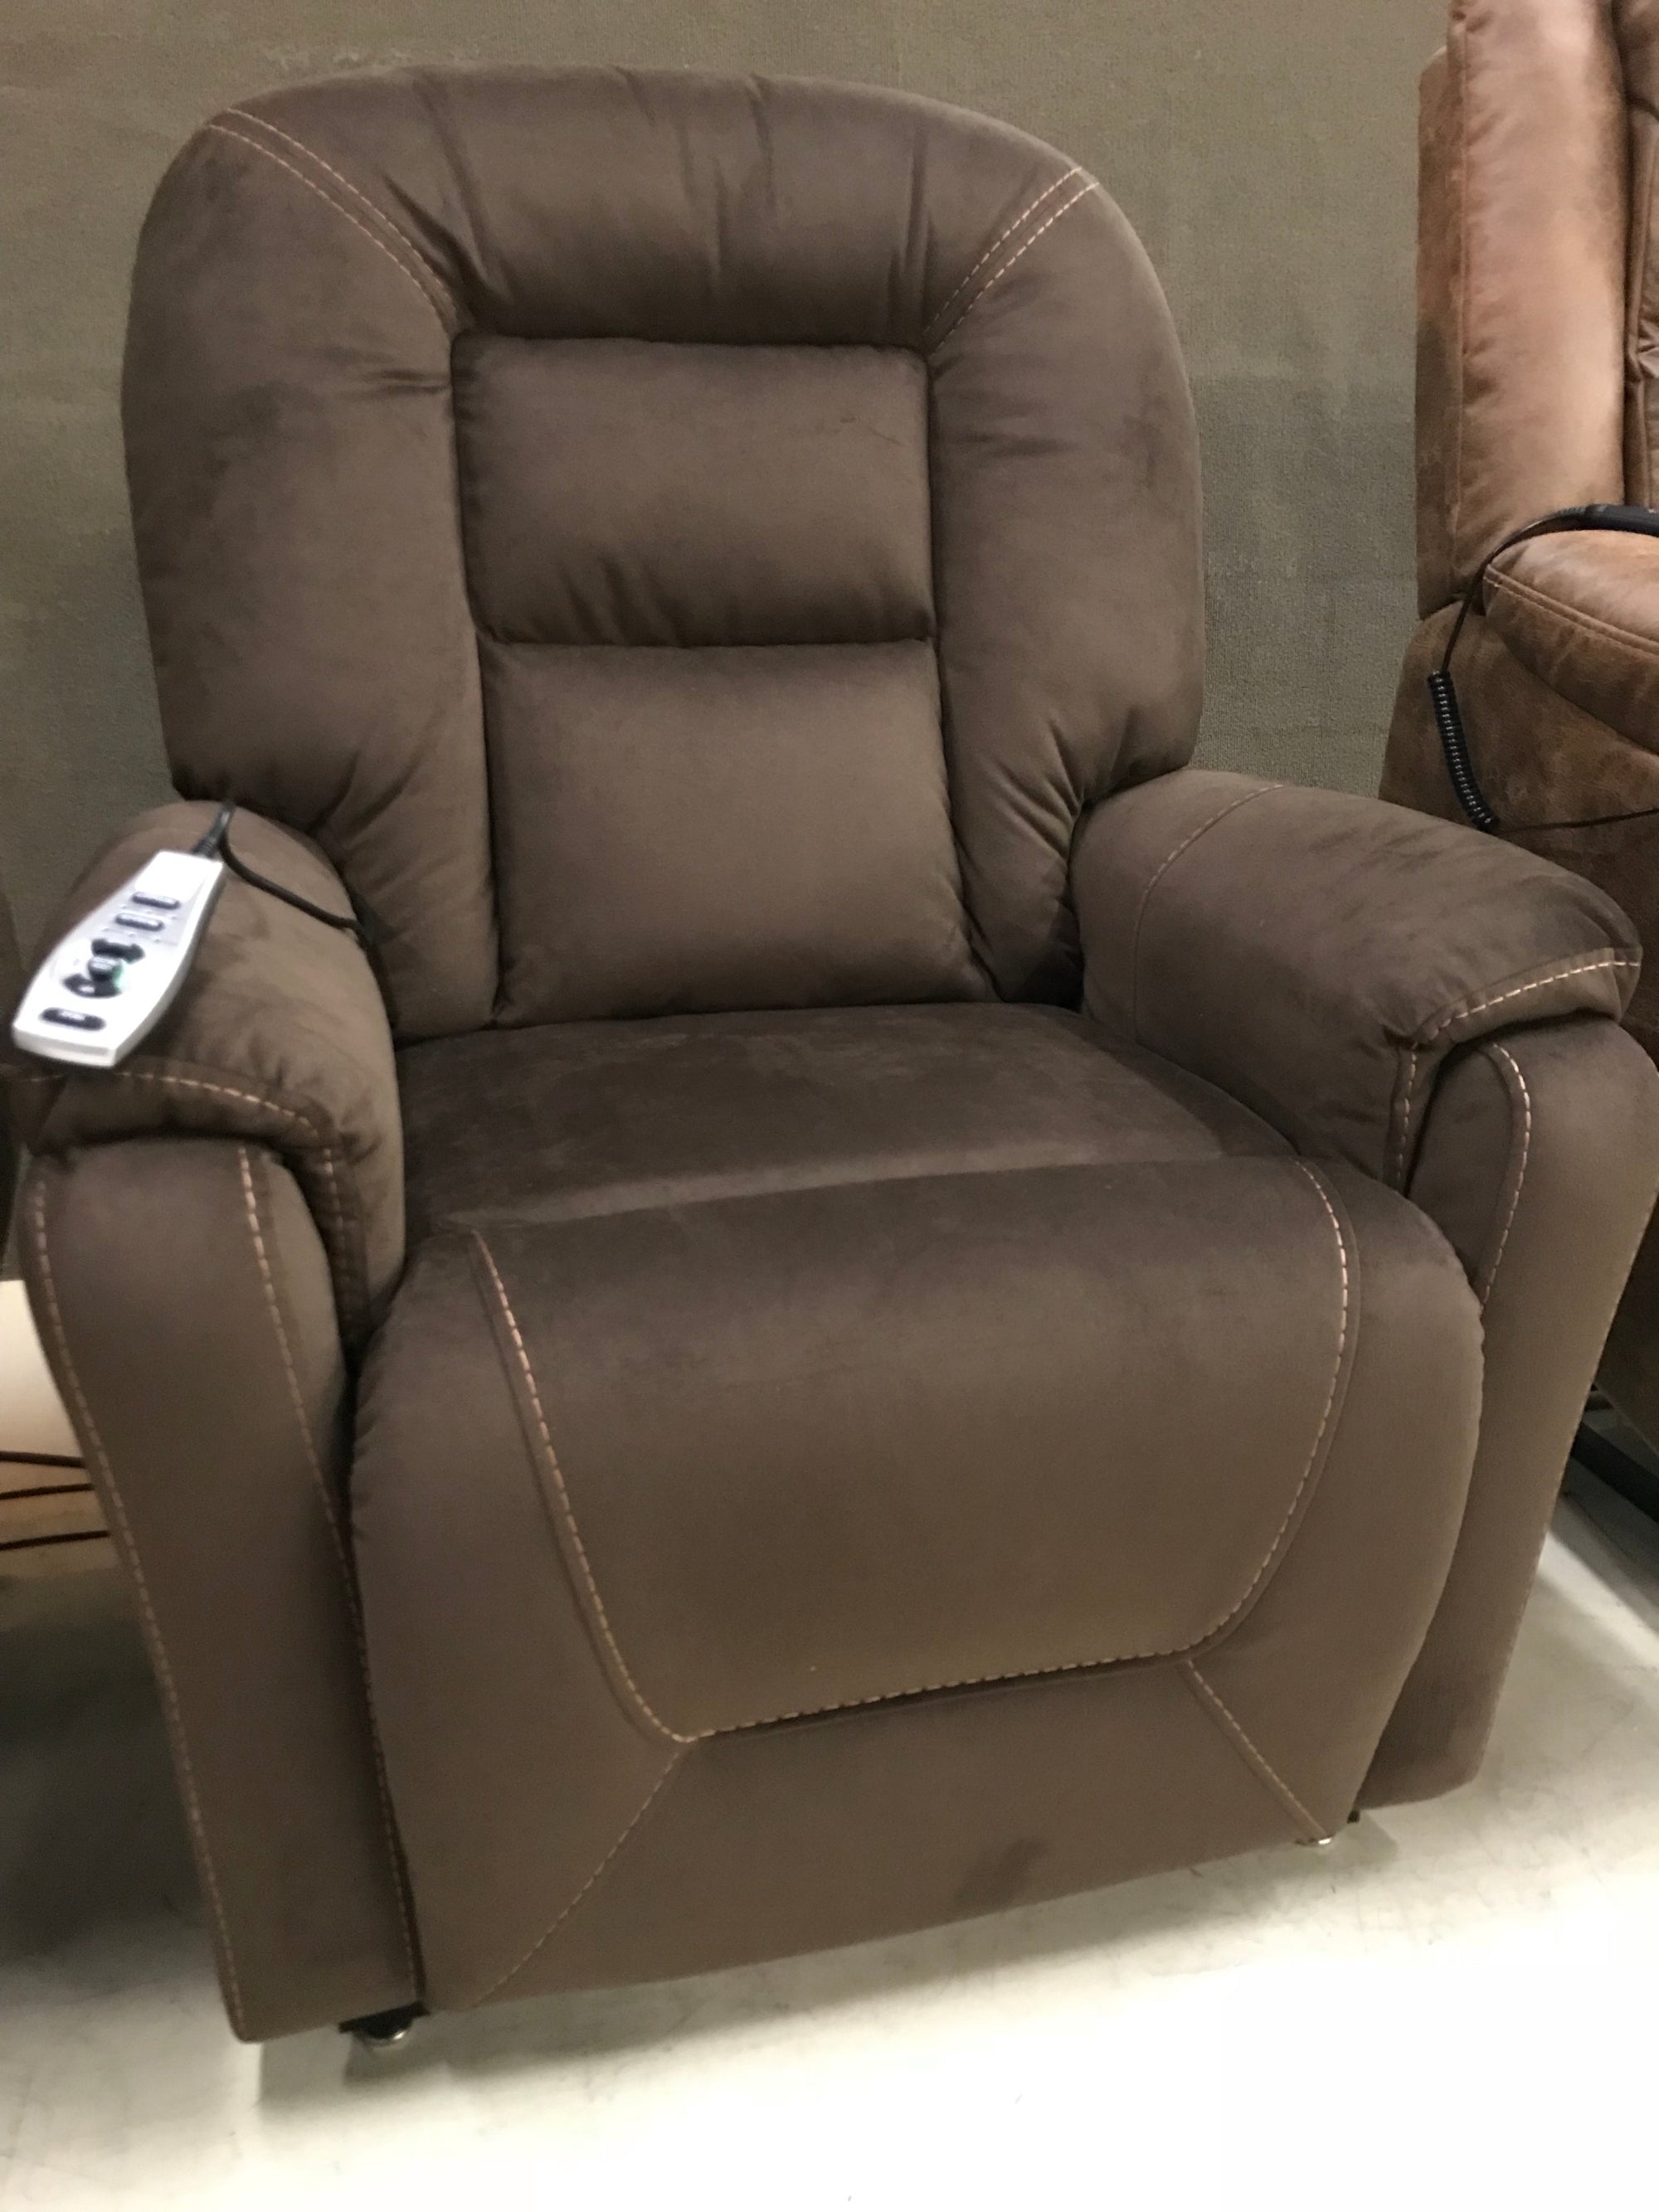 319 FI-A Power Lift Recliner with Heat and Massage